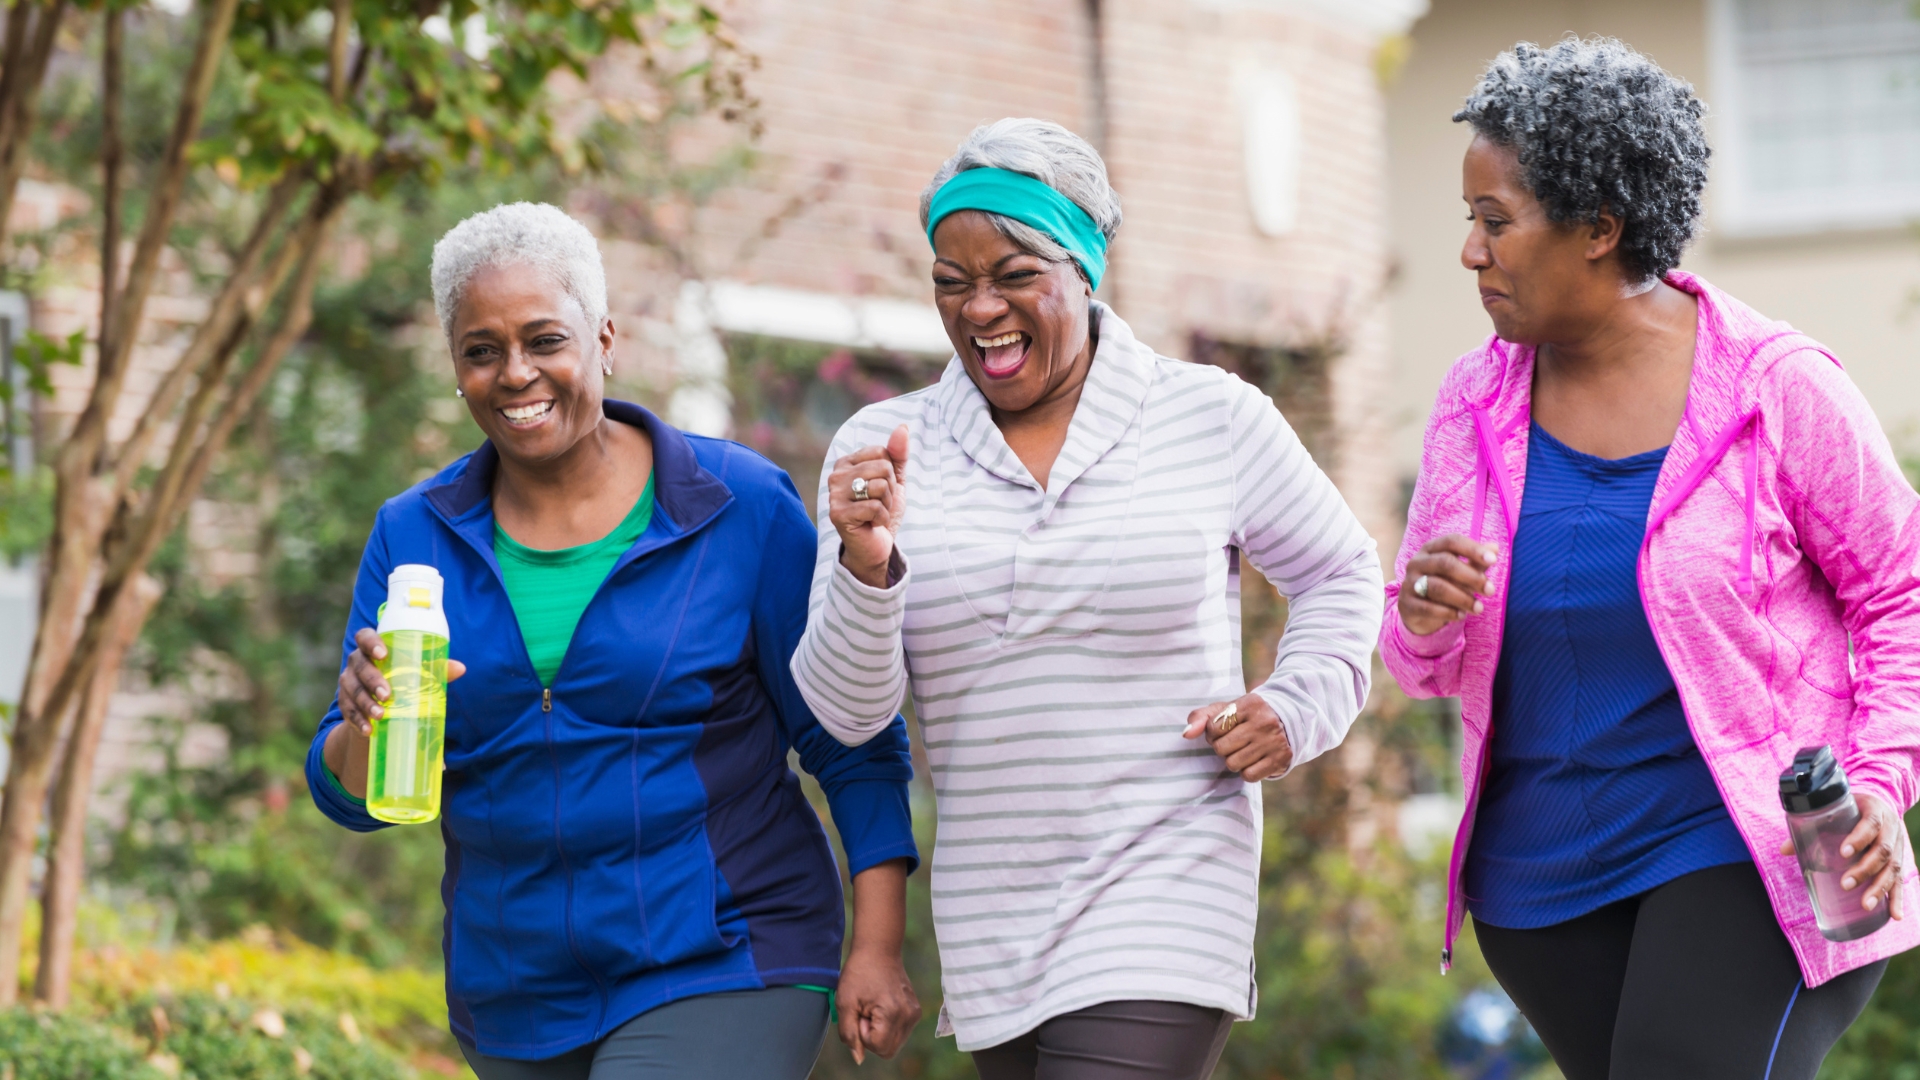 Three older women jog. The two on the sides are holding waterbottles and wearing jackets. The one in the middle has a joyous expression on her face